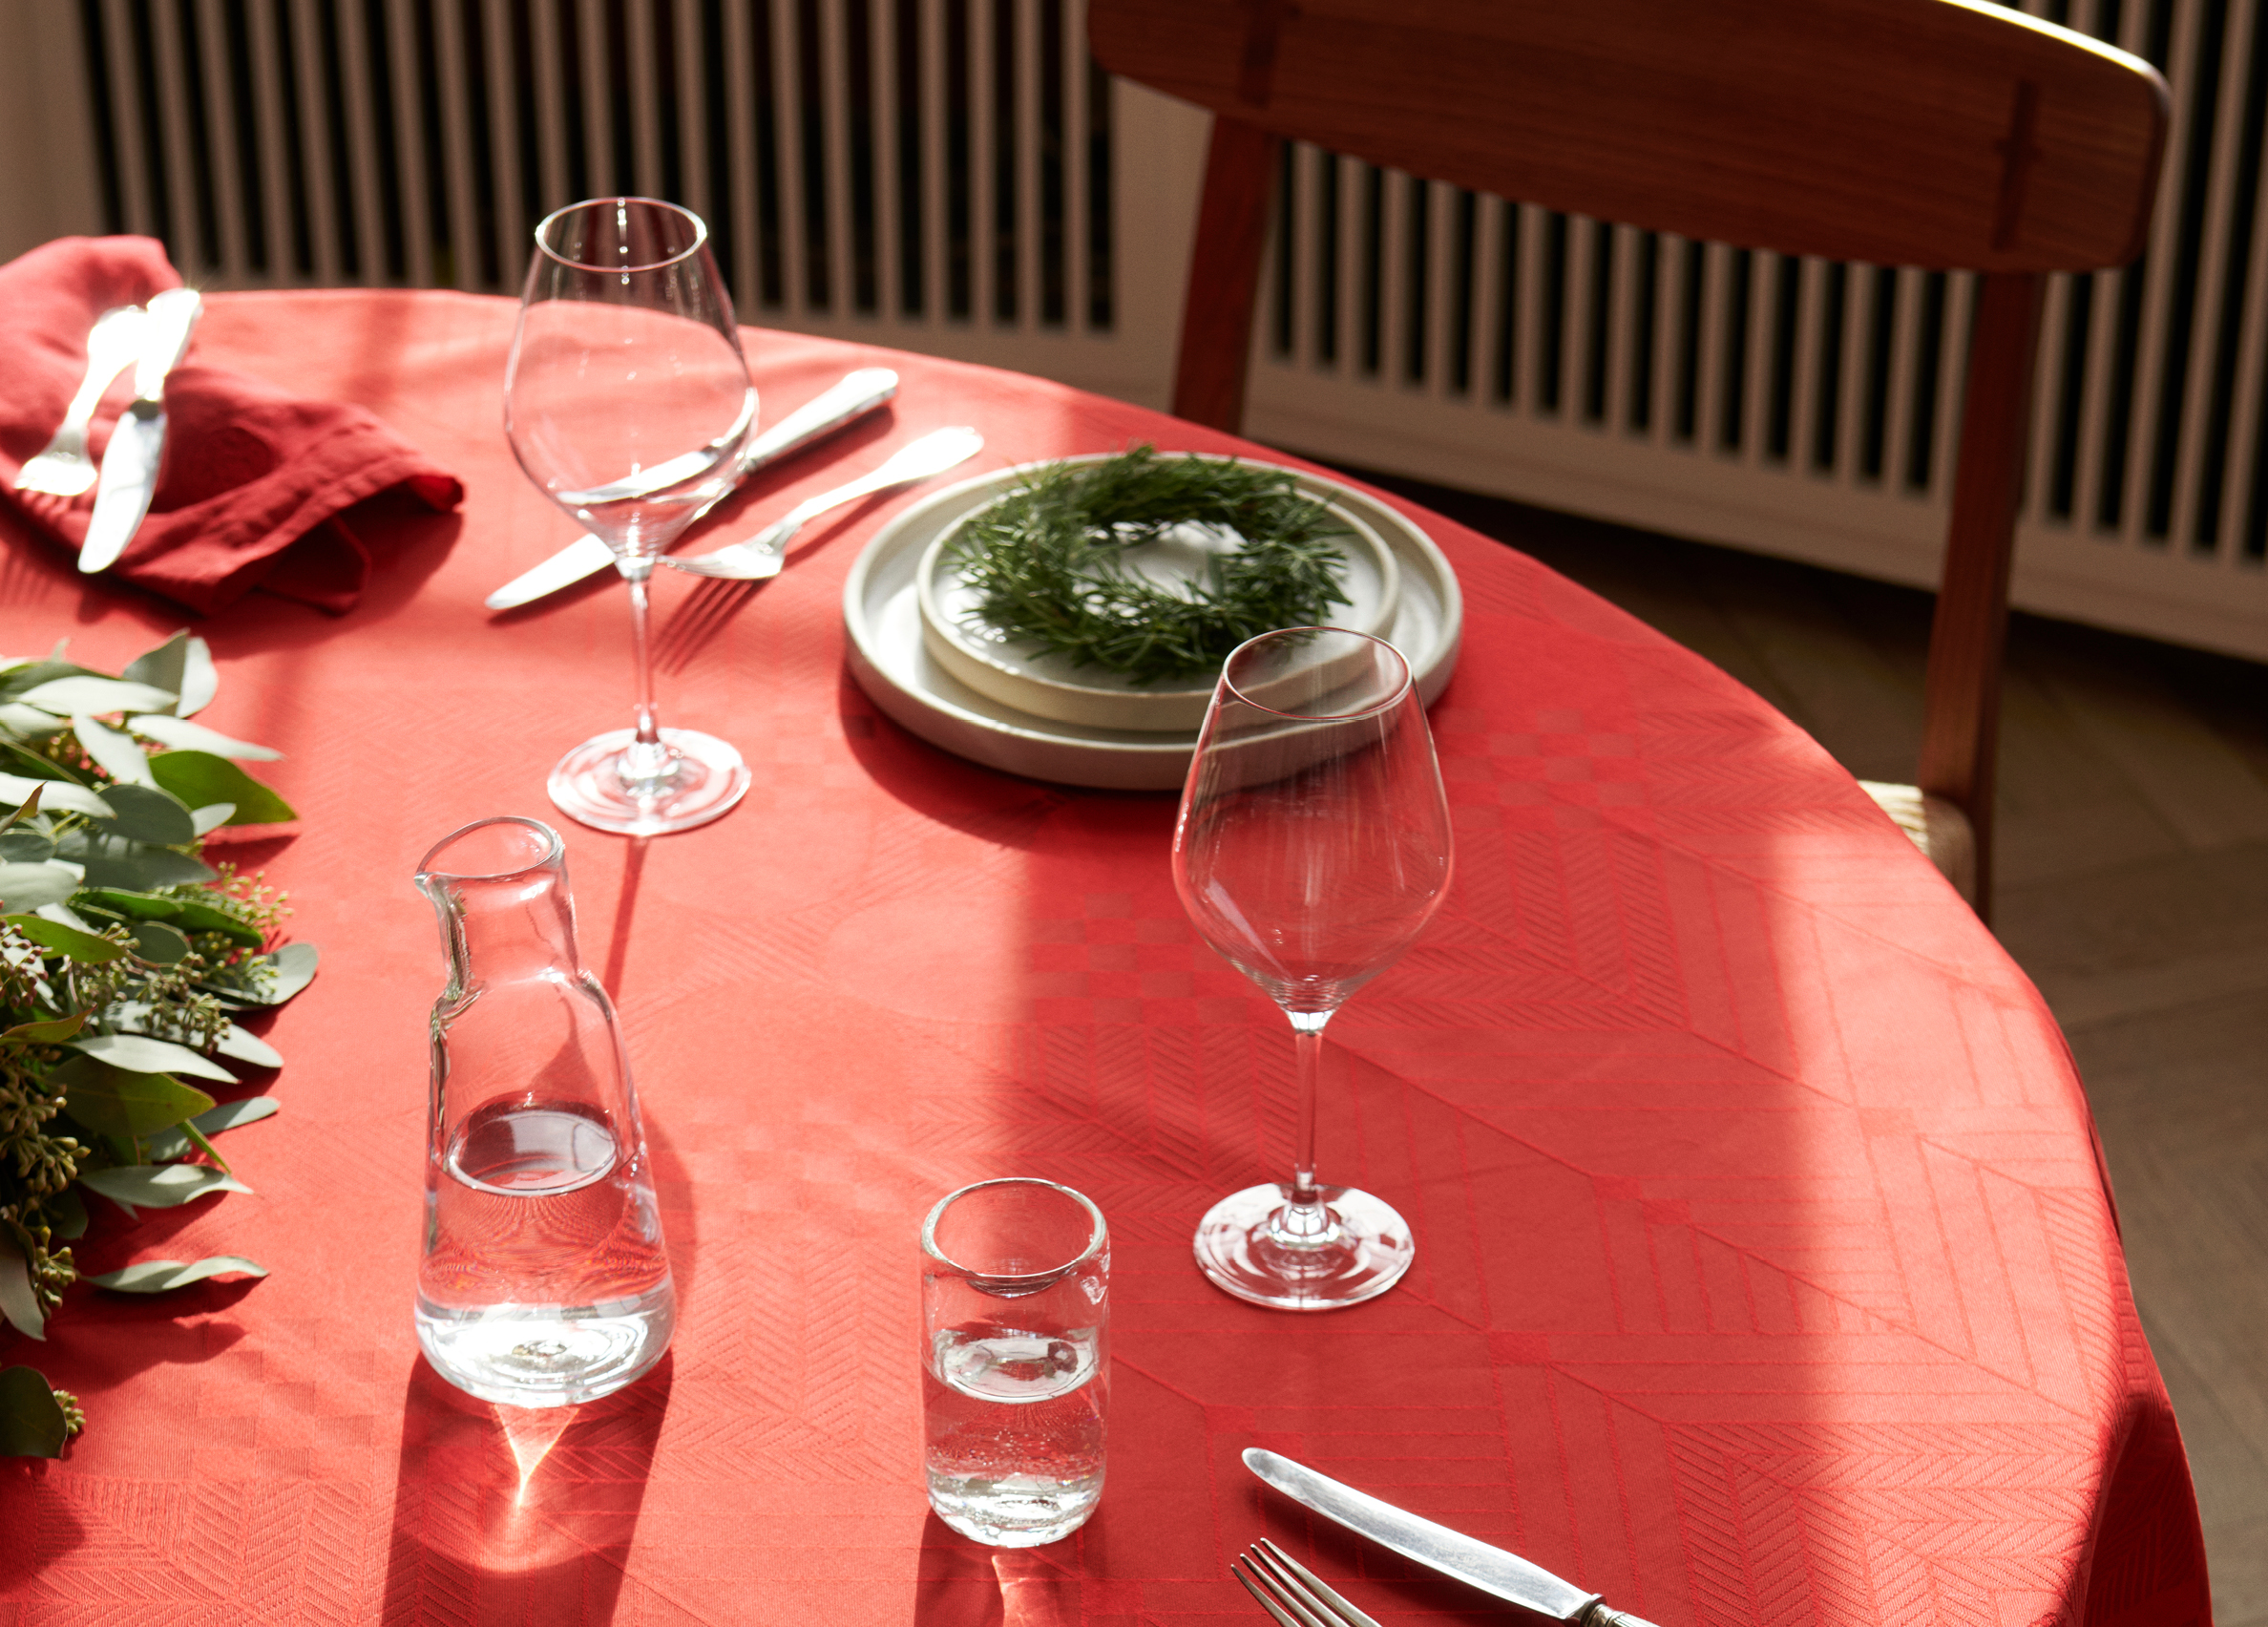 Georg Jensen Damask - Round tablecloths classic designs for life and special occasions